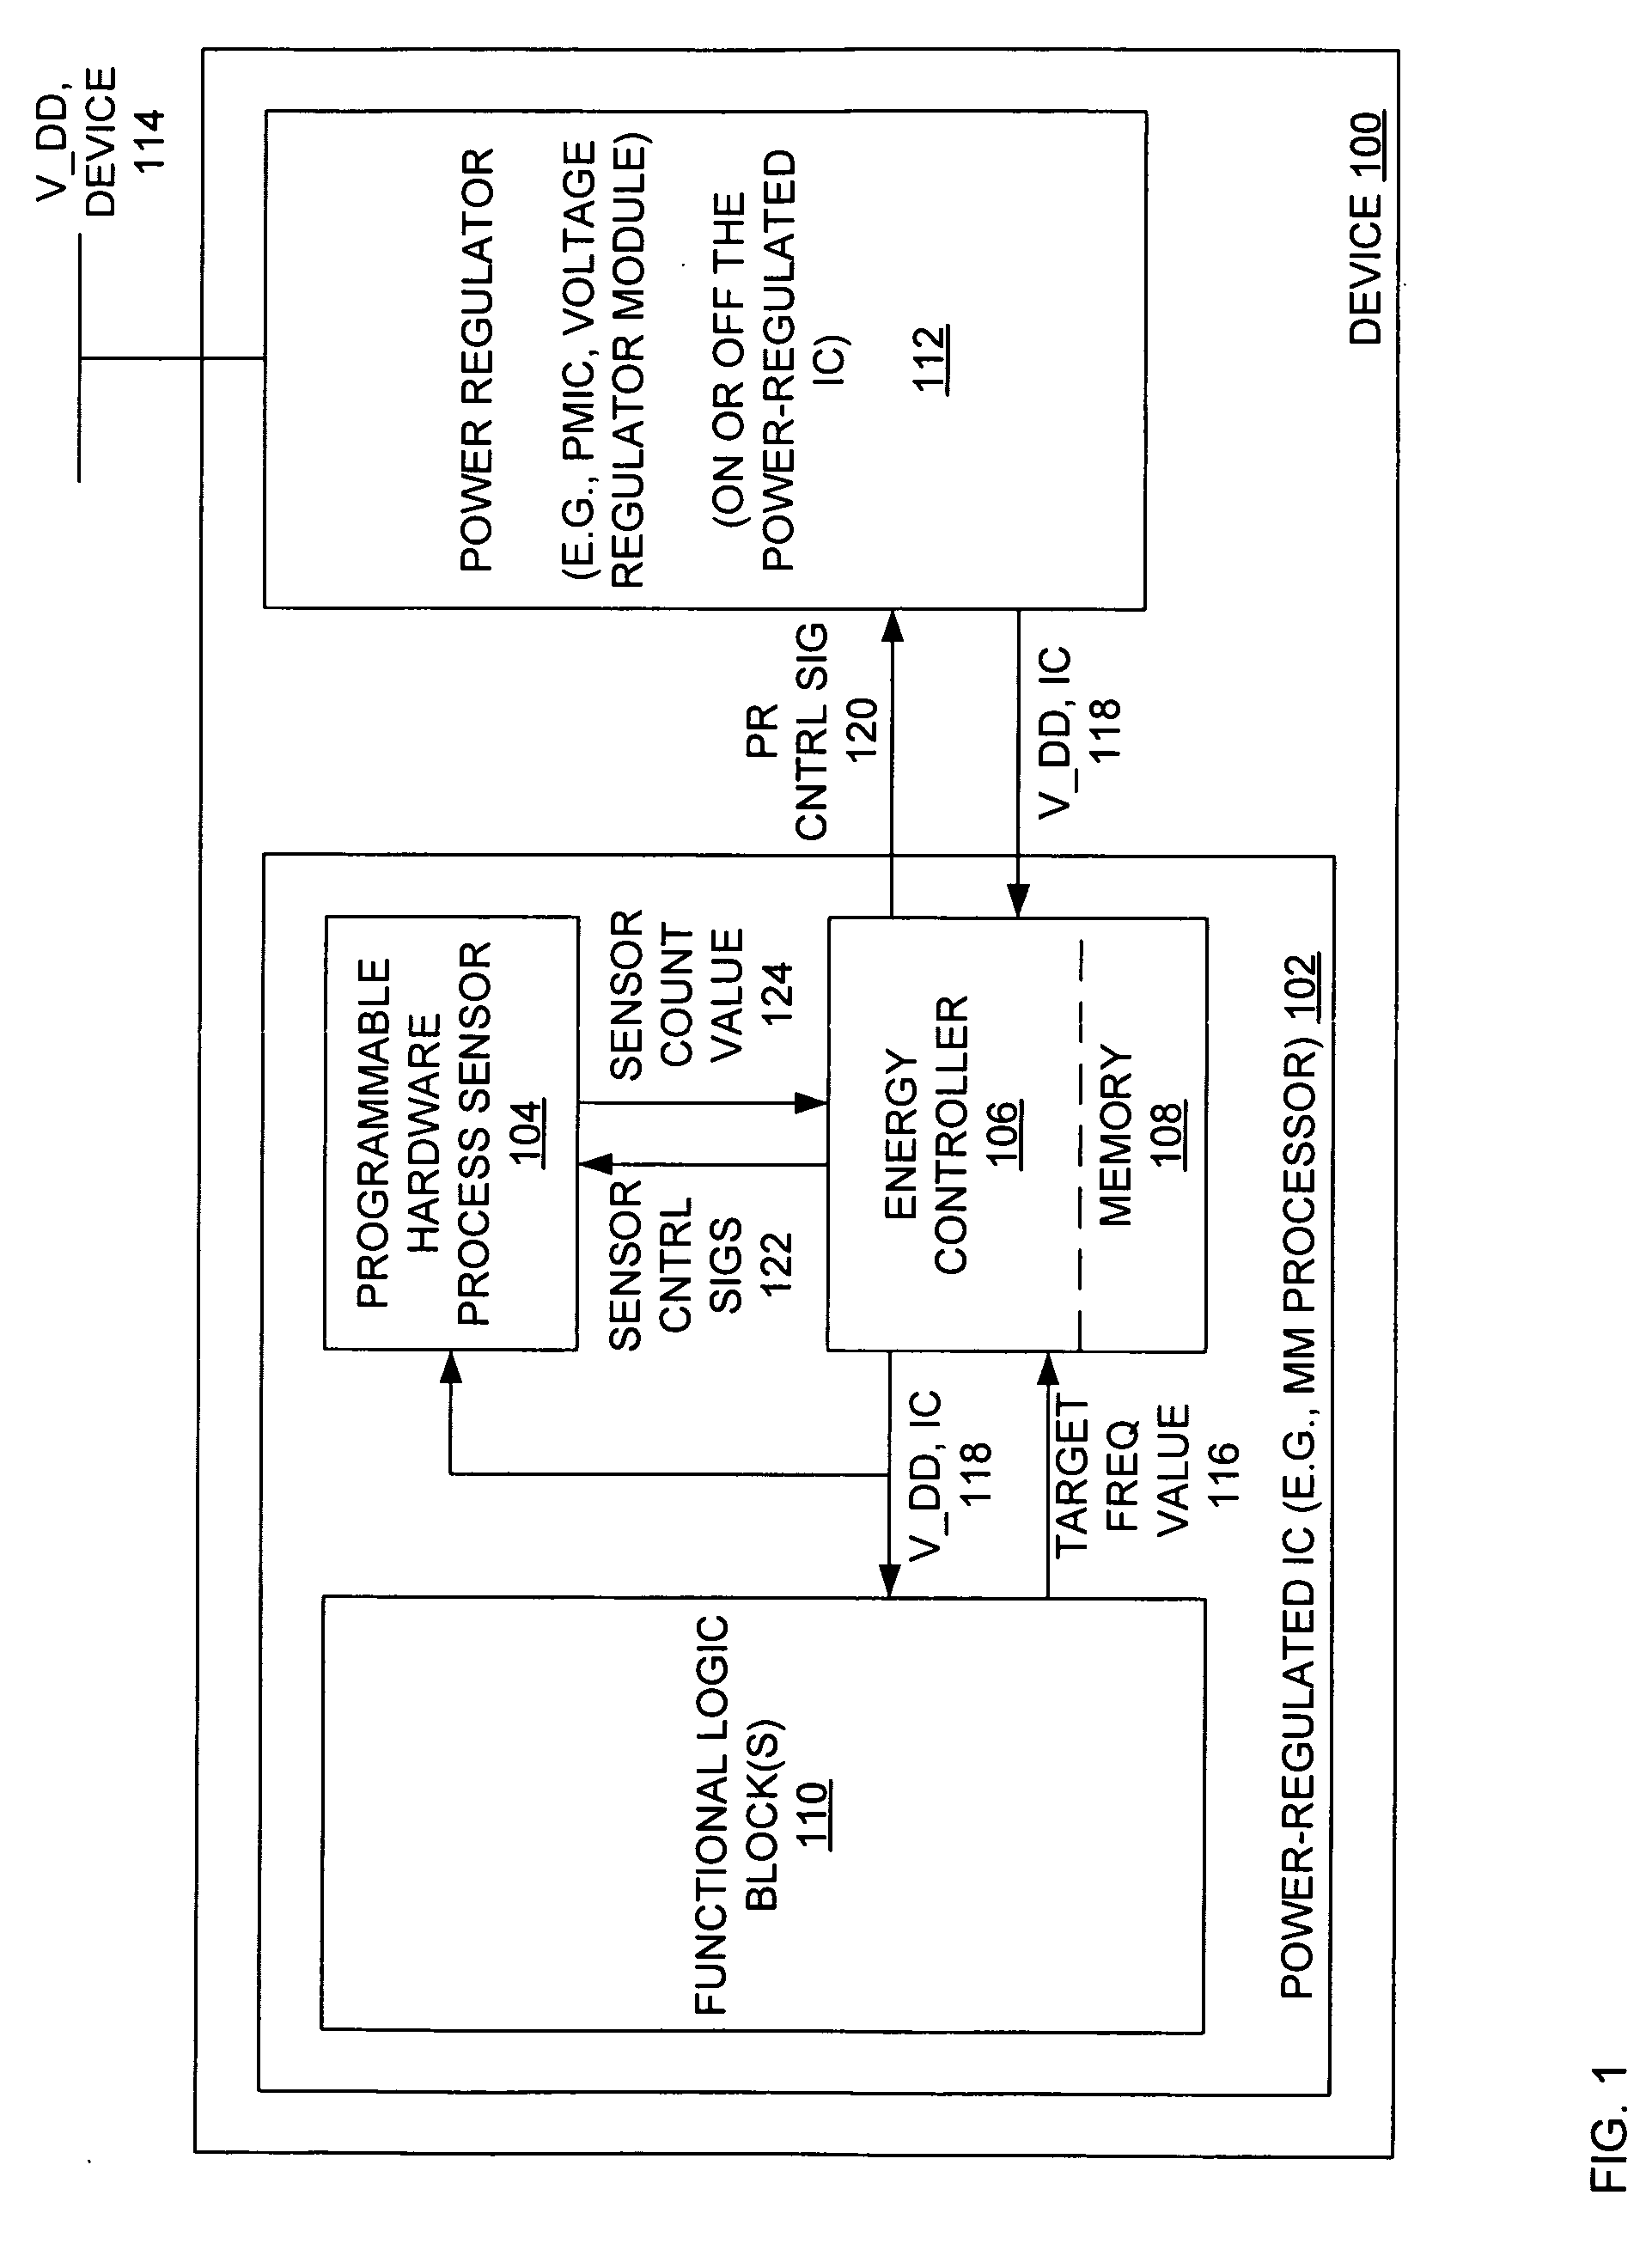 Apparatus and method for reducing power consumption by an integrated circuit